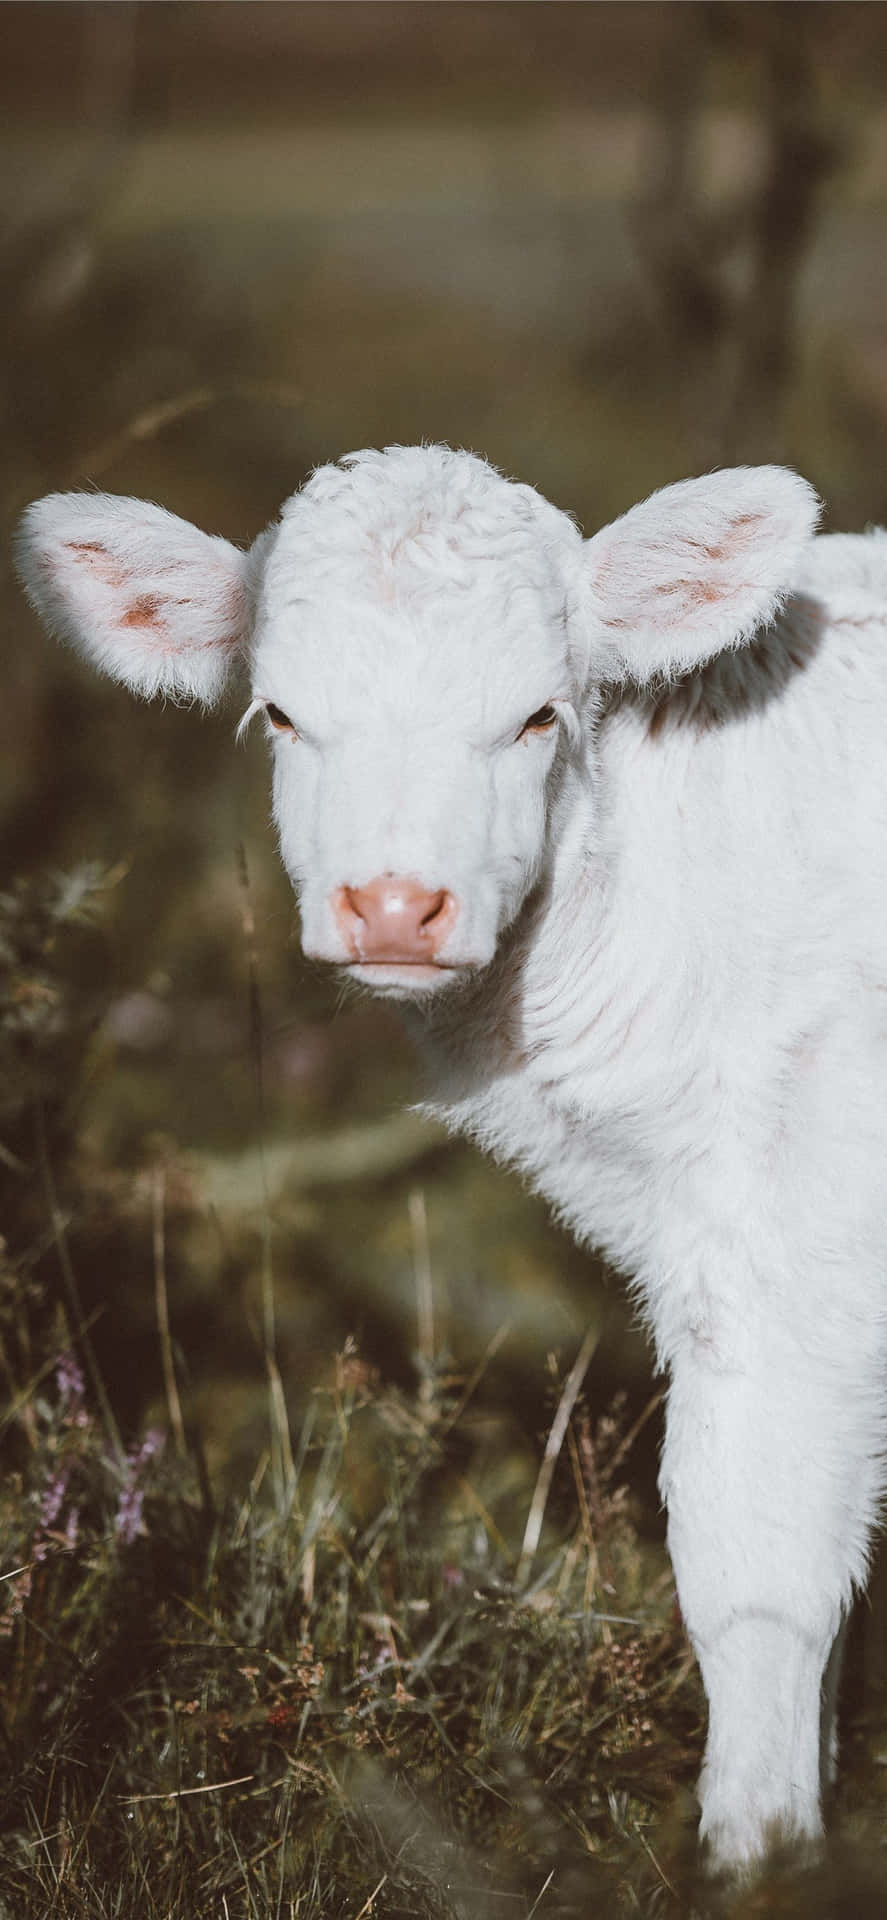 A White Calf Standing In The Grass